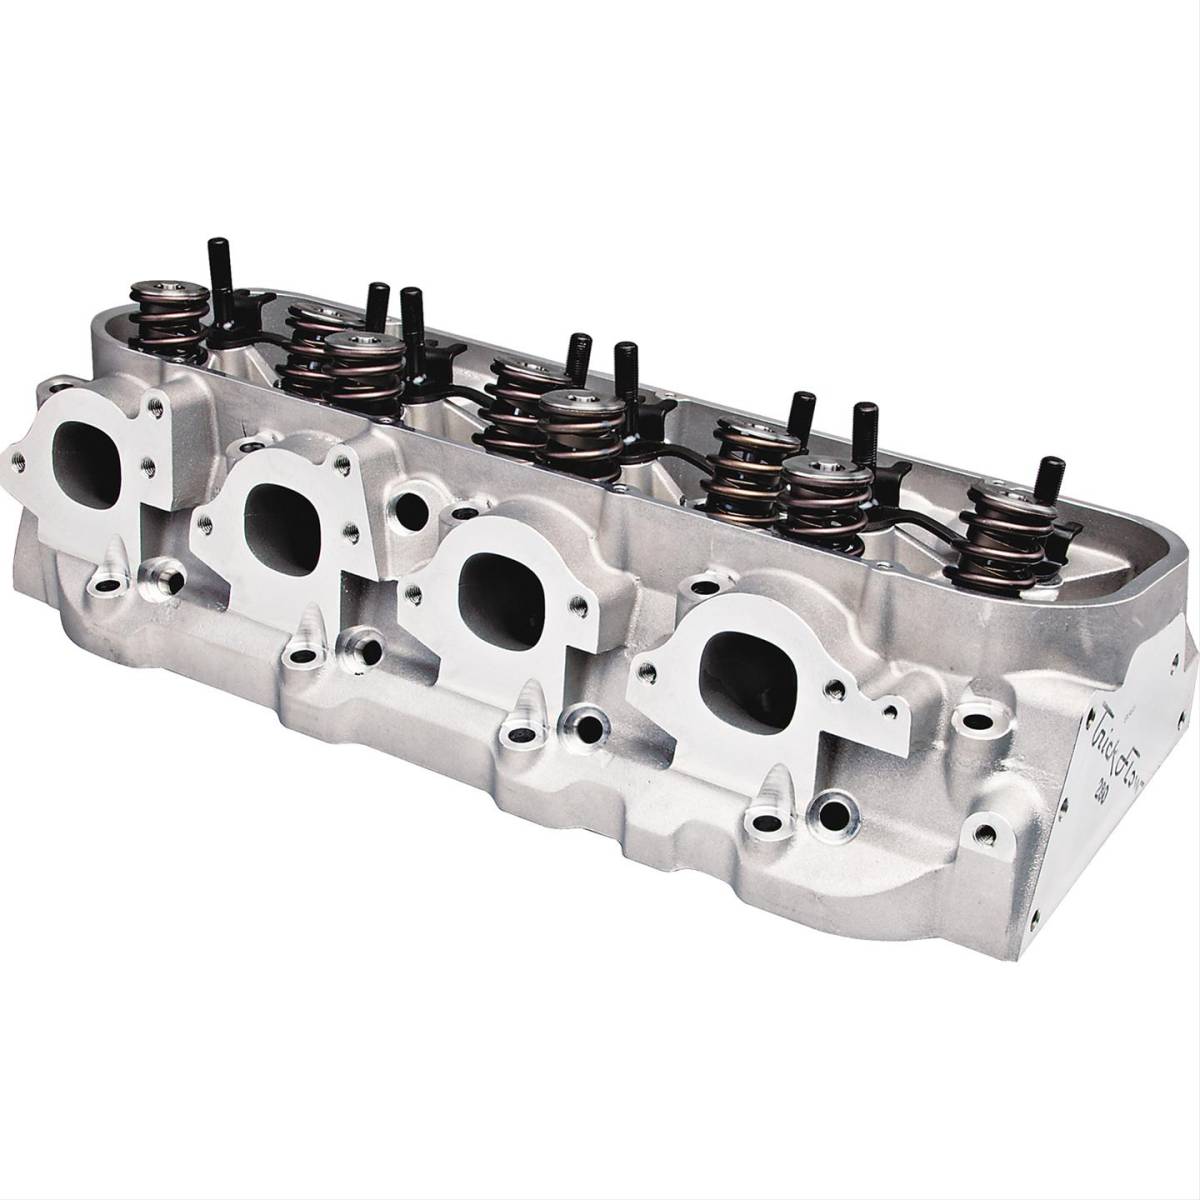 Trickflow - Trickflow PowerOval Cylinder Head, Big Block Chevy, 280cc Intake, Chromoly Retainers, Max Lift .700 - Image 1